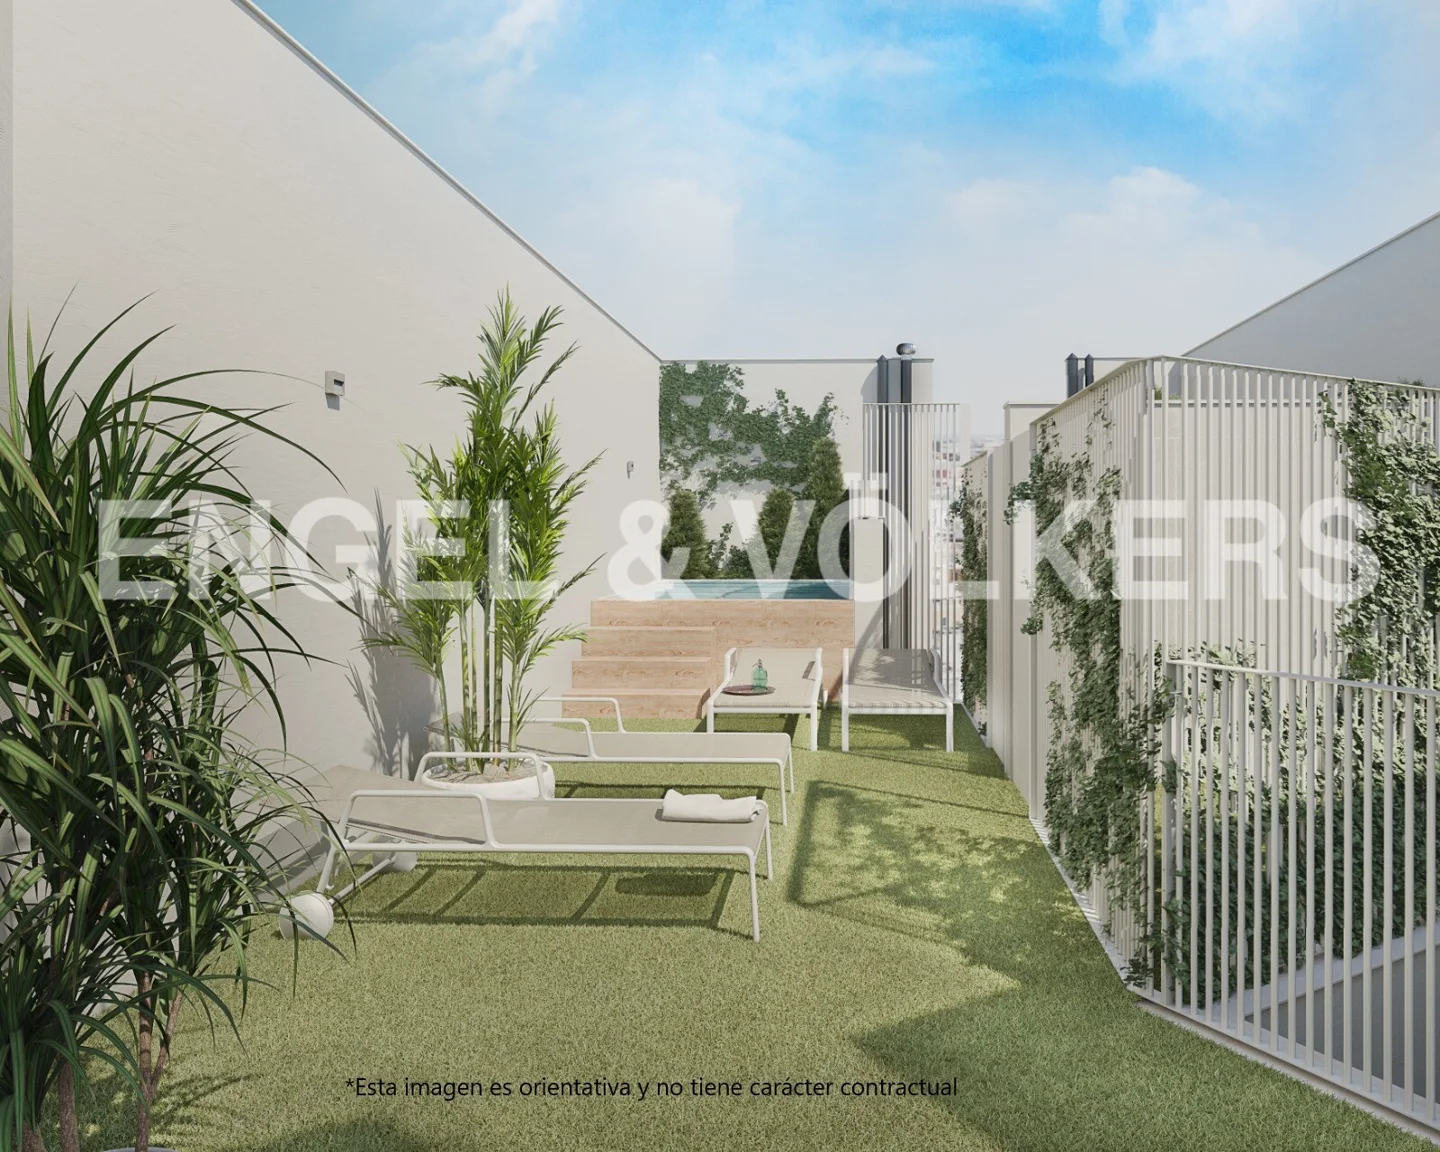 Exclusive brand-new duplex penthouse with terrace and pool in the center of Seville.